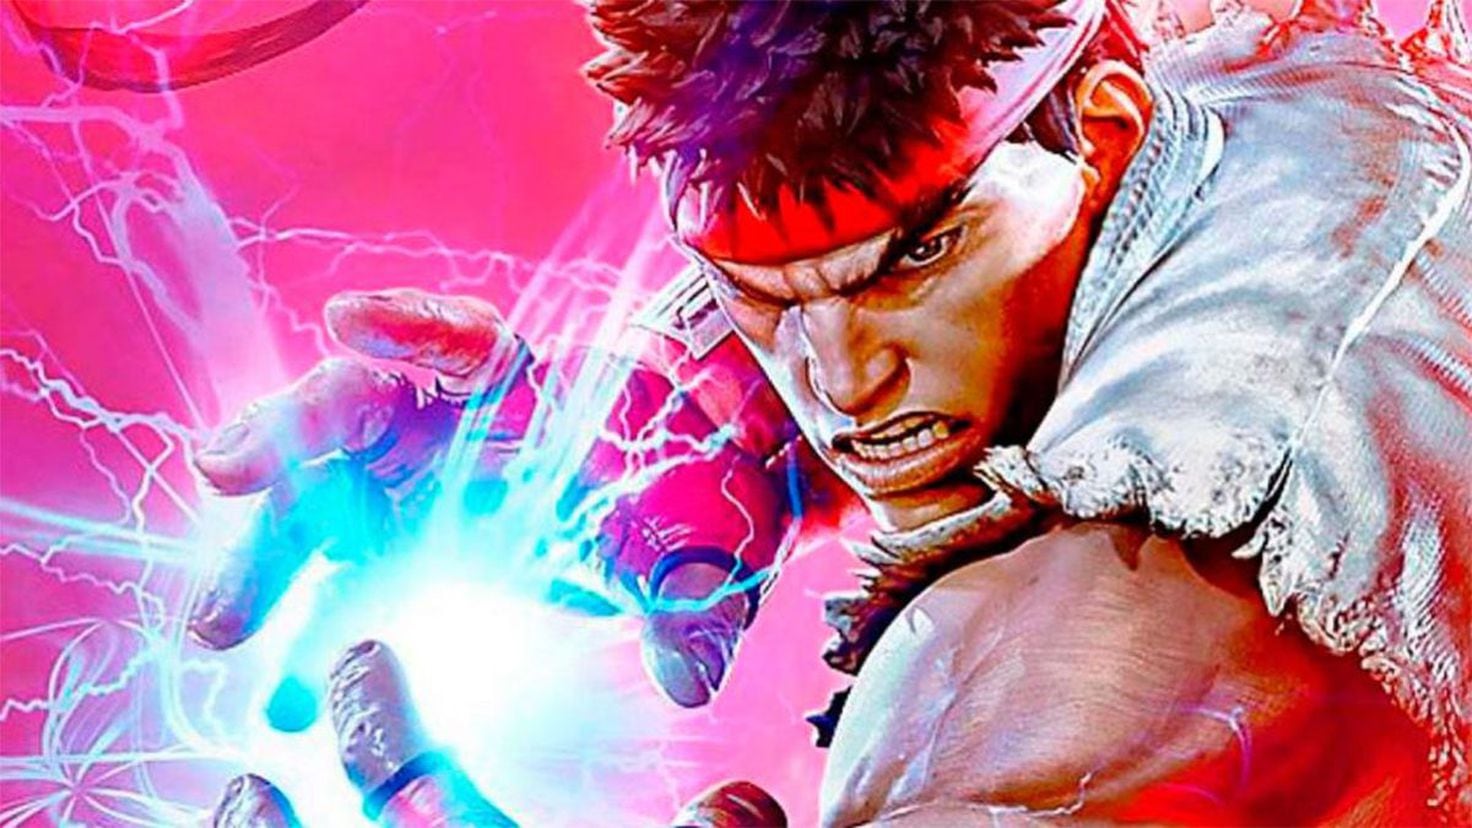 Street Fighter V: Champion Edition Review - All The Great Content